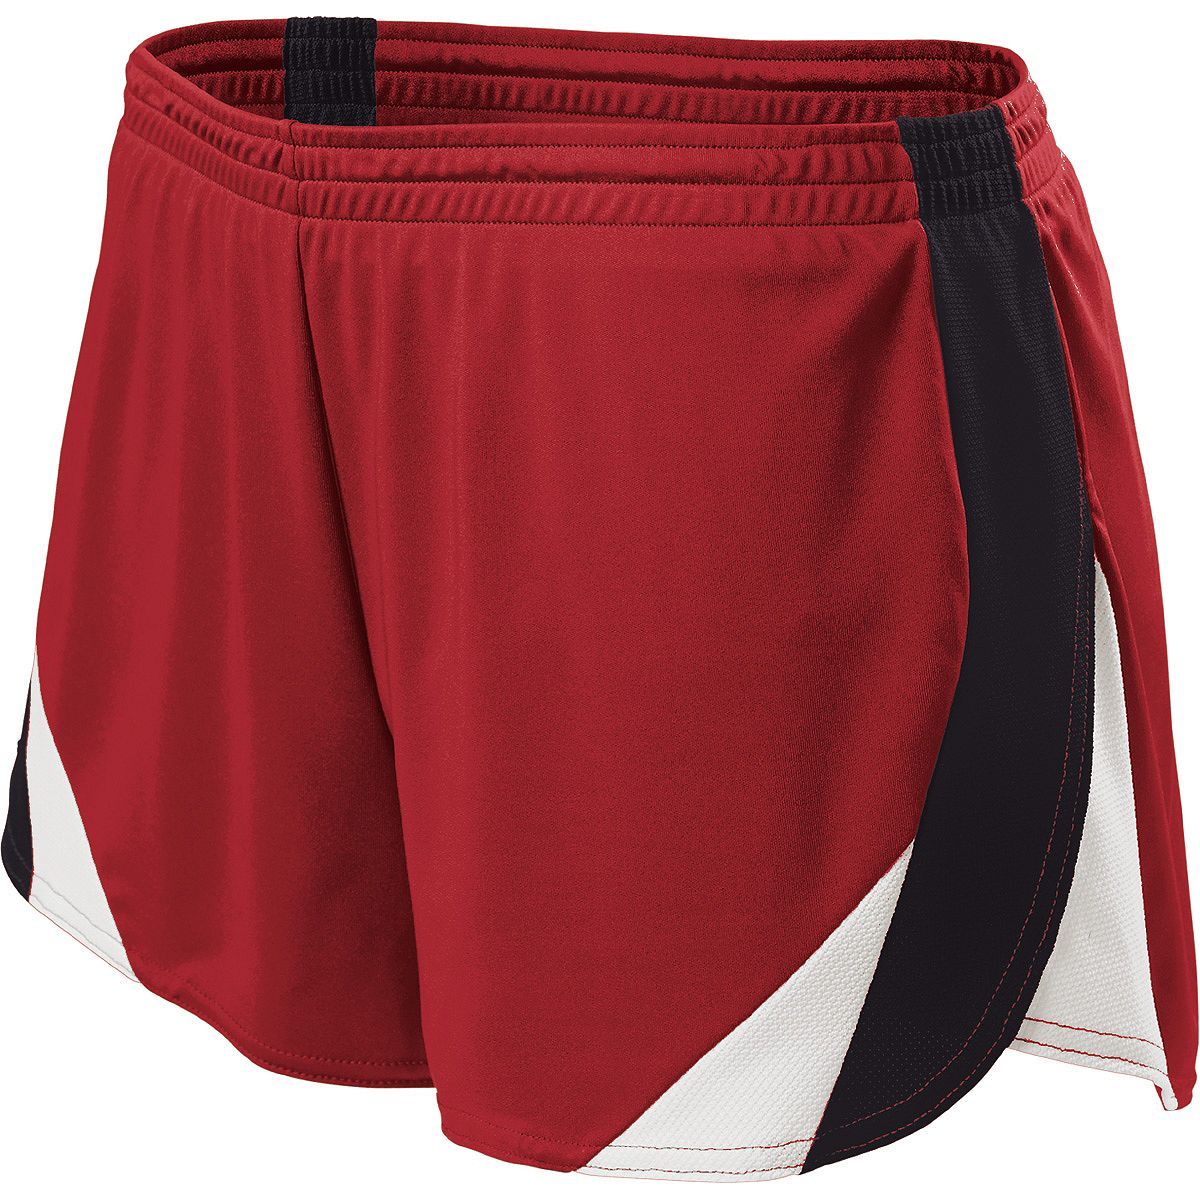 Holloway Ladies Approach Shorts in Scarlet/Black/White  -Part of the Ladies, Ladies-Shorts, Track-Field, Holloway product lines at KanaleyCreations.com